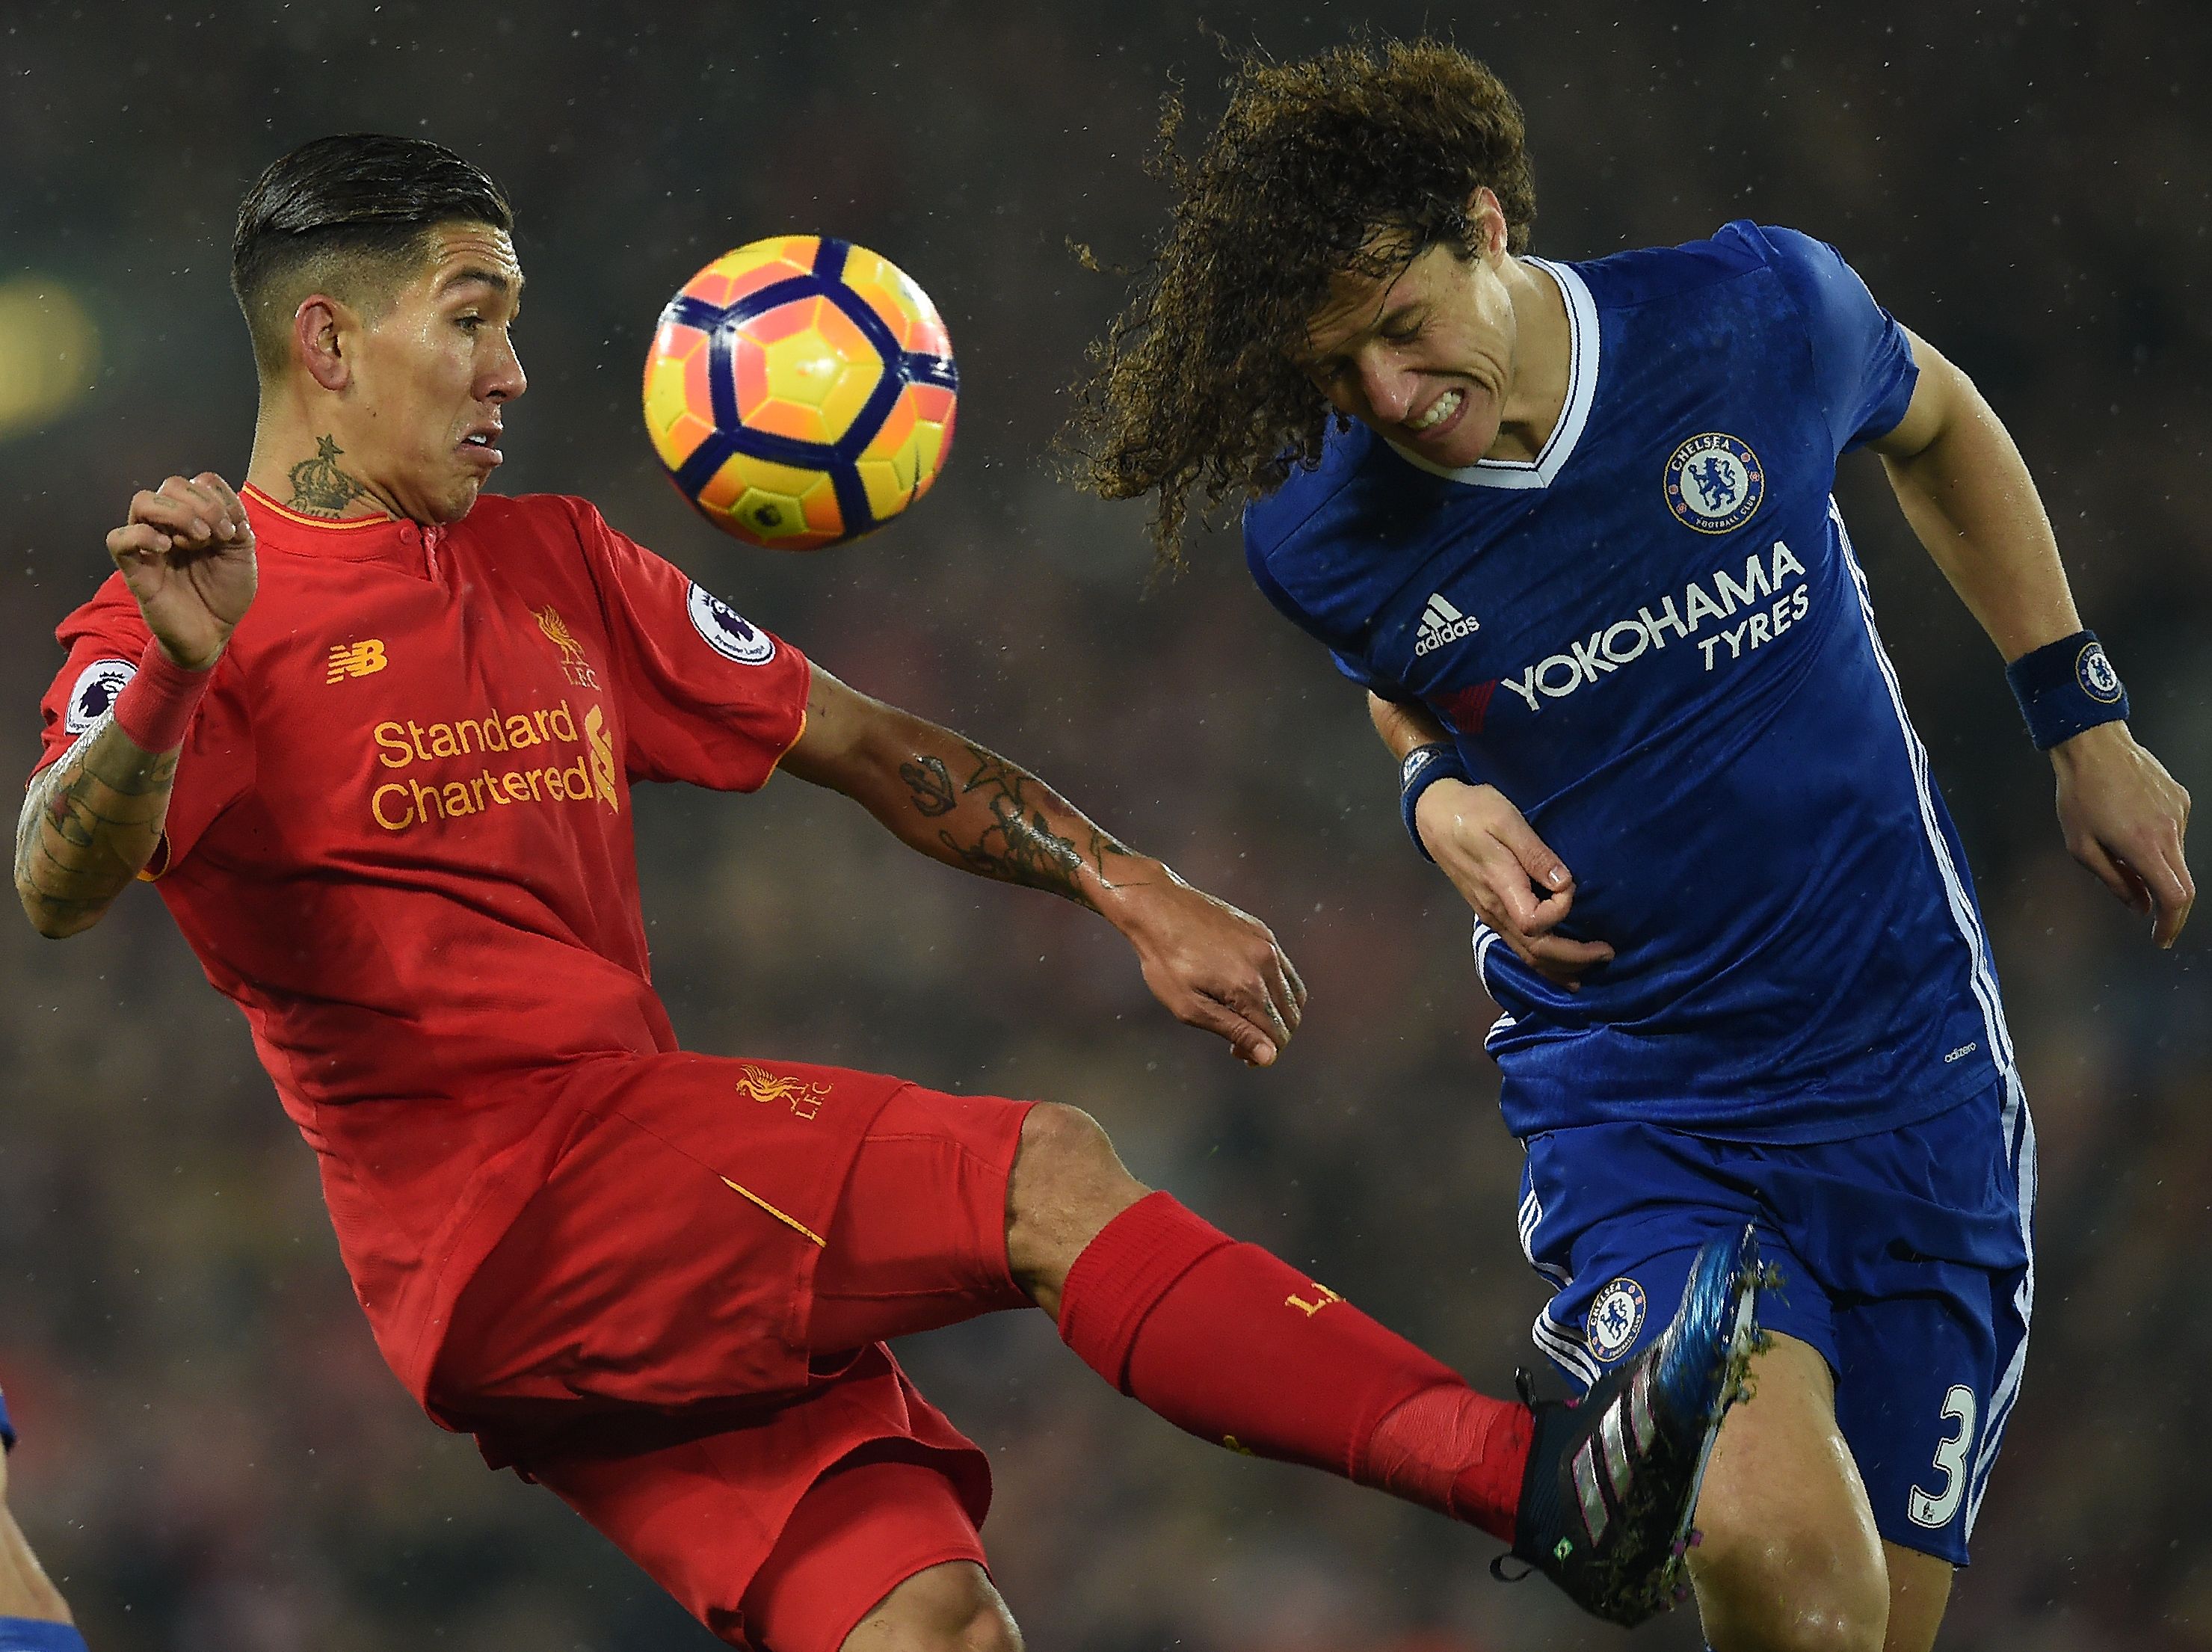 Liverpool's Brazilian midfielder Roberto Firmino (L) vies with Chelsea's Brazilian defender David Luiz during the English Premier League football match between Liverpool and Chelsea at Anfield in Liverpool, north west England on January 31, 2017. / AFP / PAUL ELLIS / RESTRICTED TO EDITORIAL USE. No use with unauthorized audio, video, data, fixture lists, club/league logos or 'live' services. Online in-match use limited to 75 images, no video emulation. No use in betting, games or single club/league/player publications.  /         (Photo credit should read PAUL ELLIS/AFP/Getty Images)